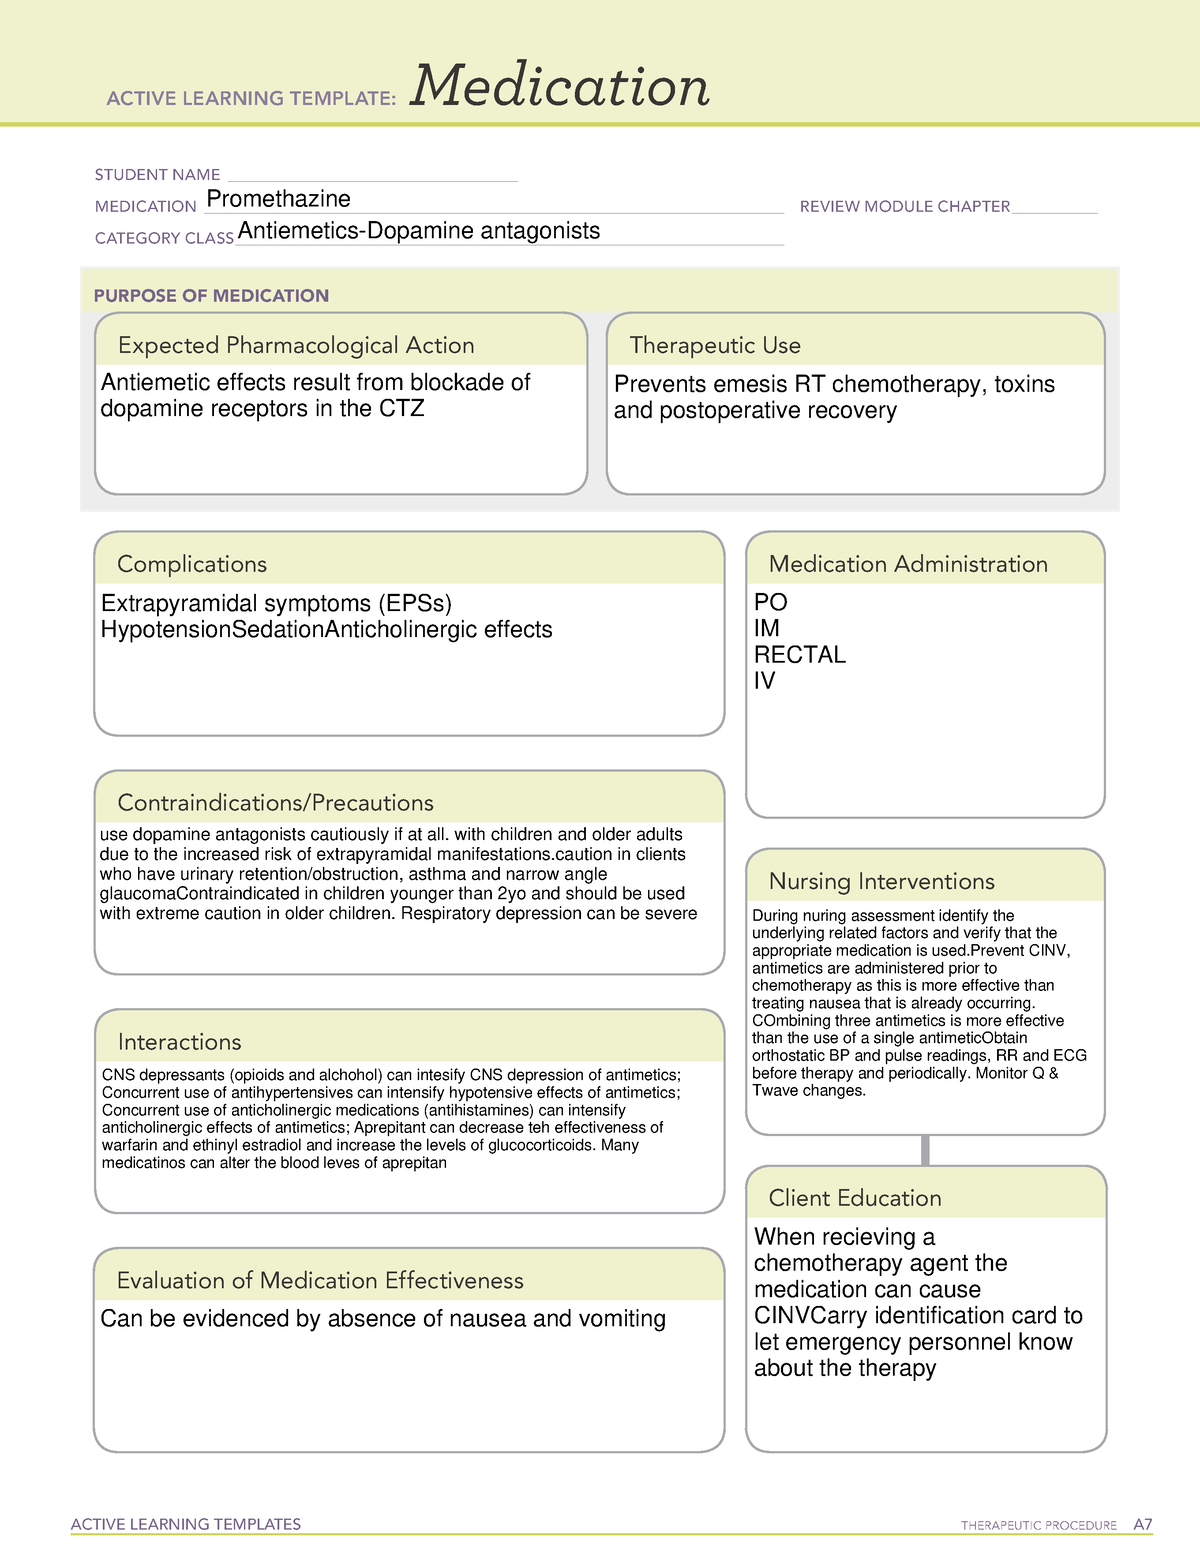 active-learning-template-medication-12-prom-active-learning-templates-therapeutic-procedure-a